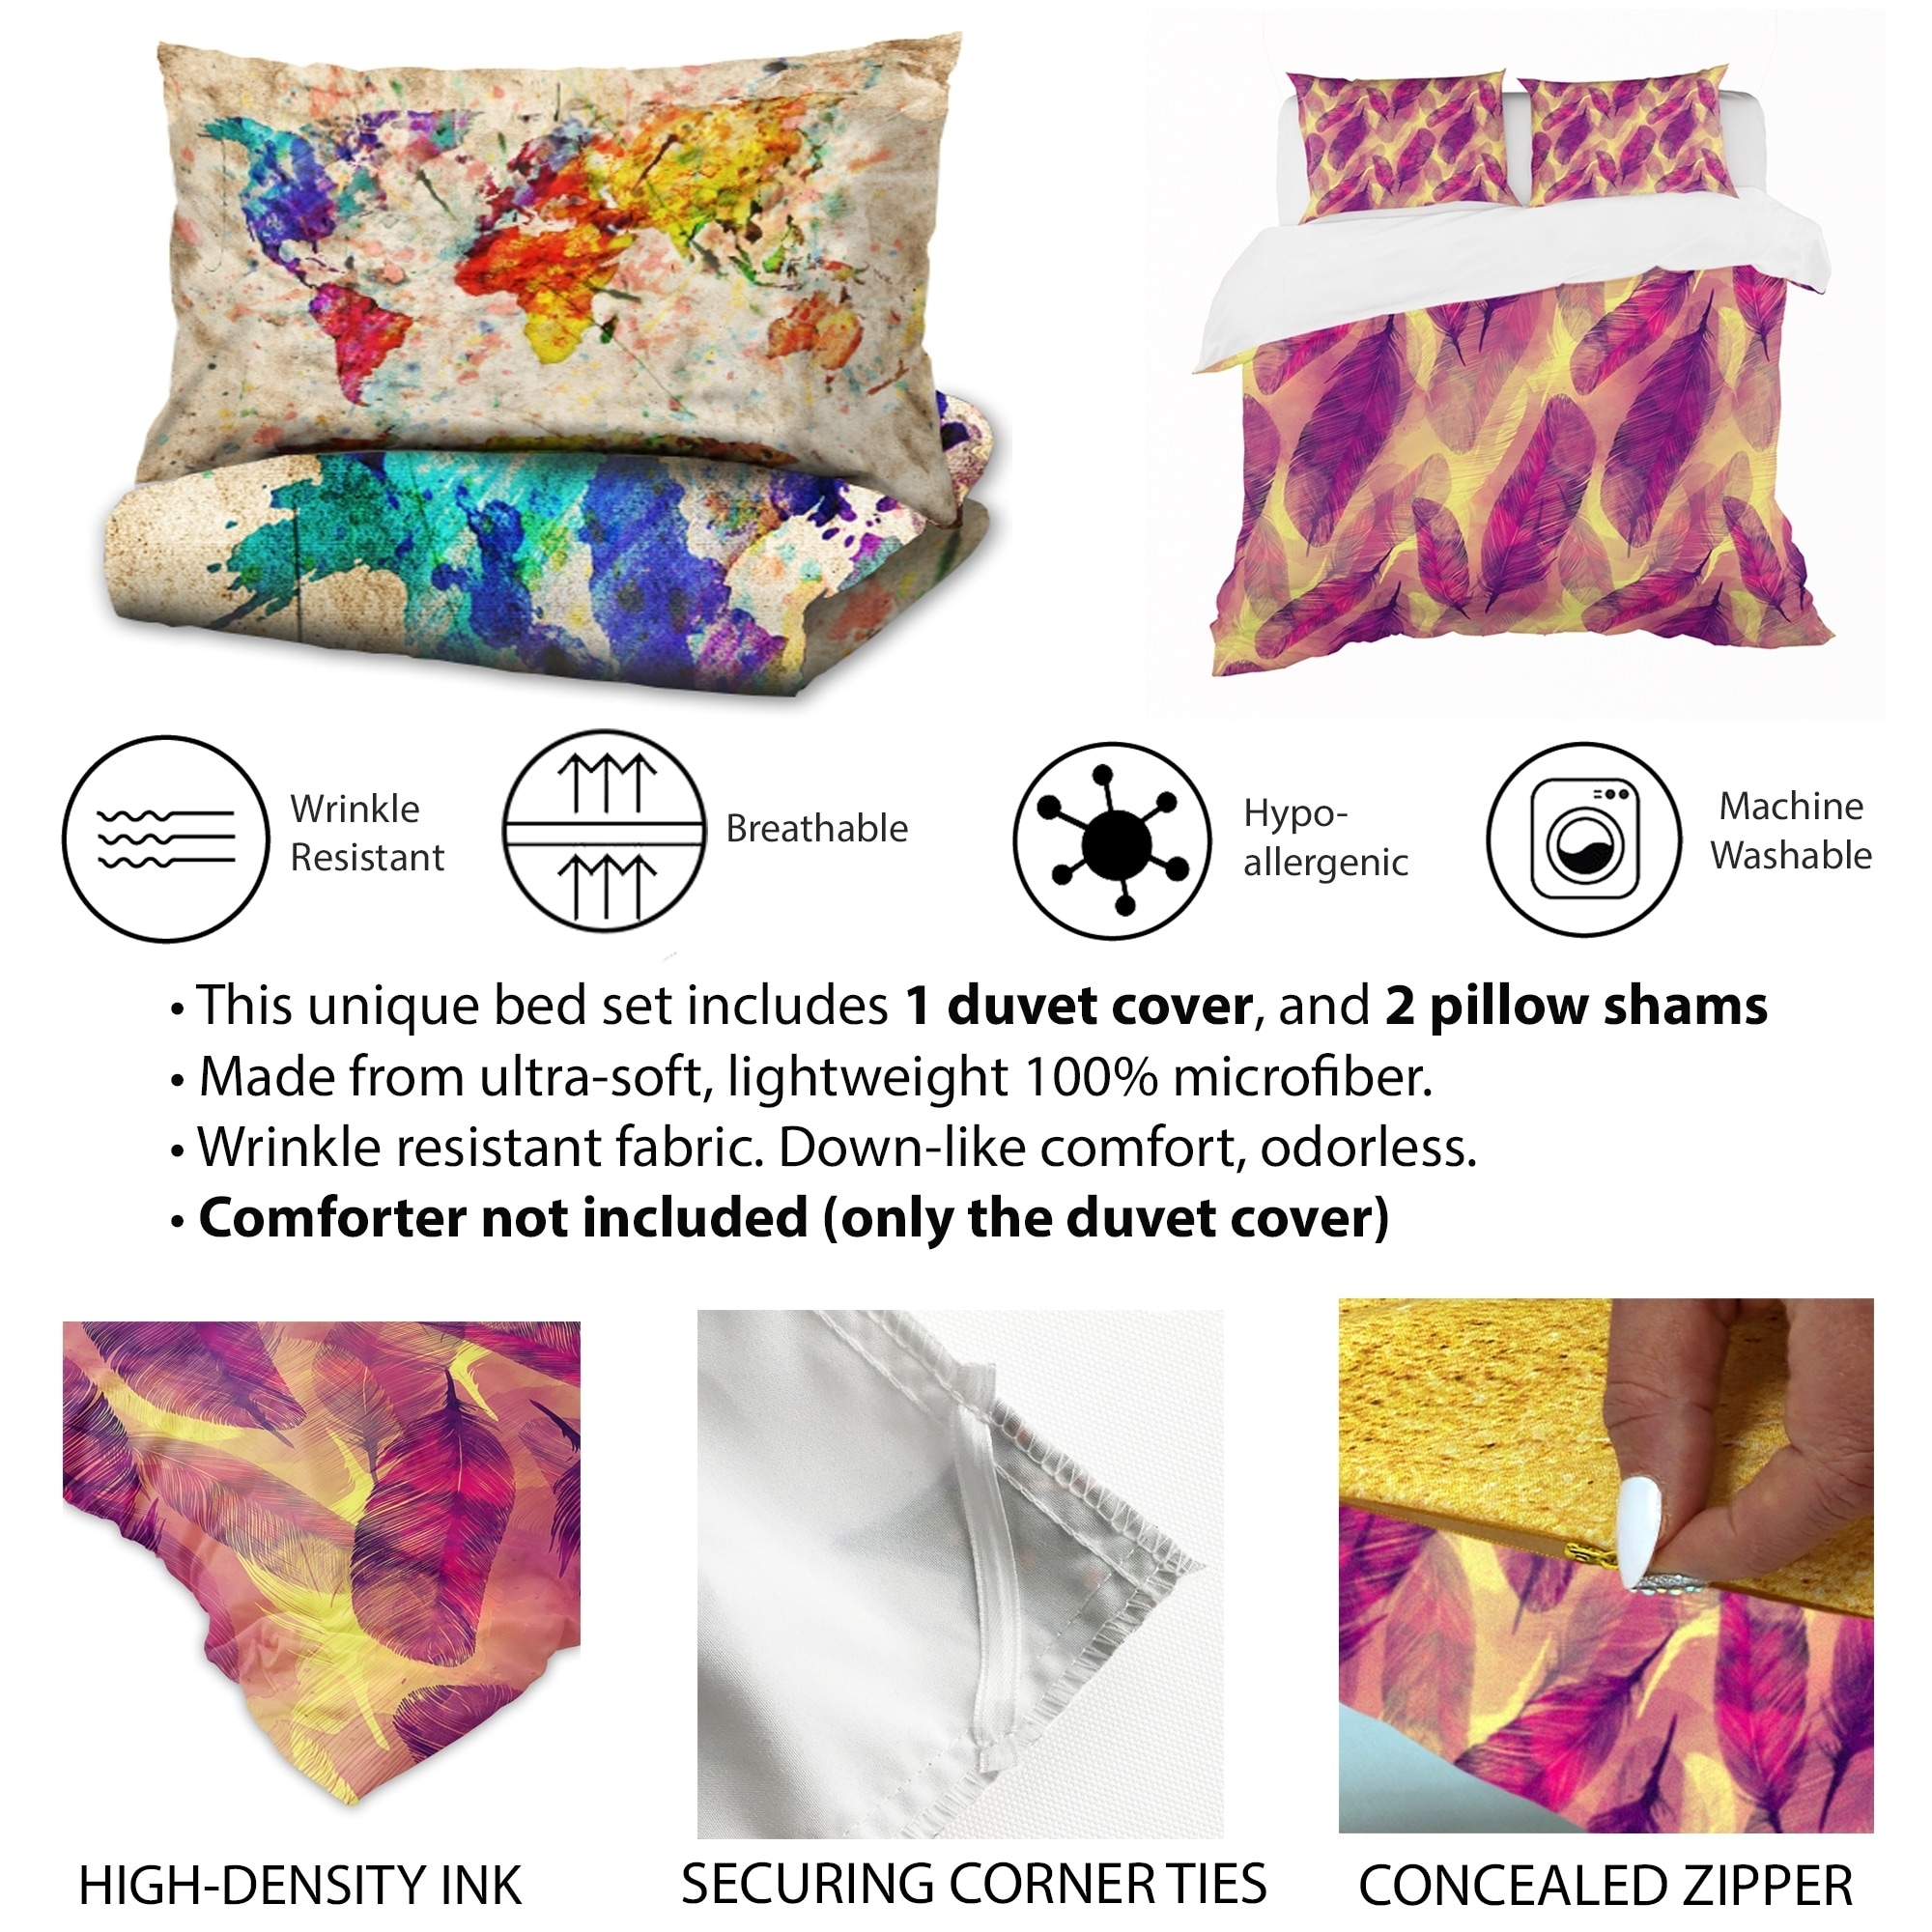 Designart 'Anemones And Peacock Feathers' Floral Bedding Set - Duvet Cover & Shams